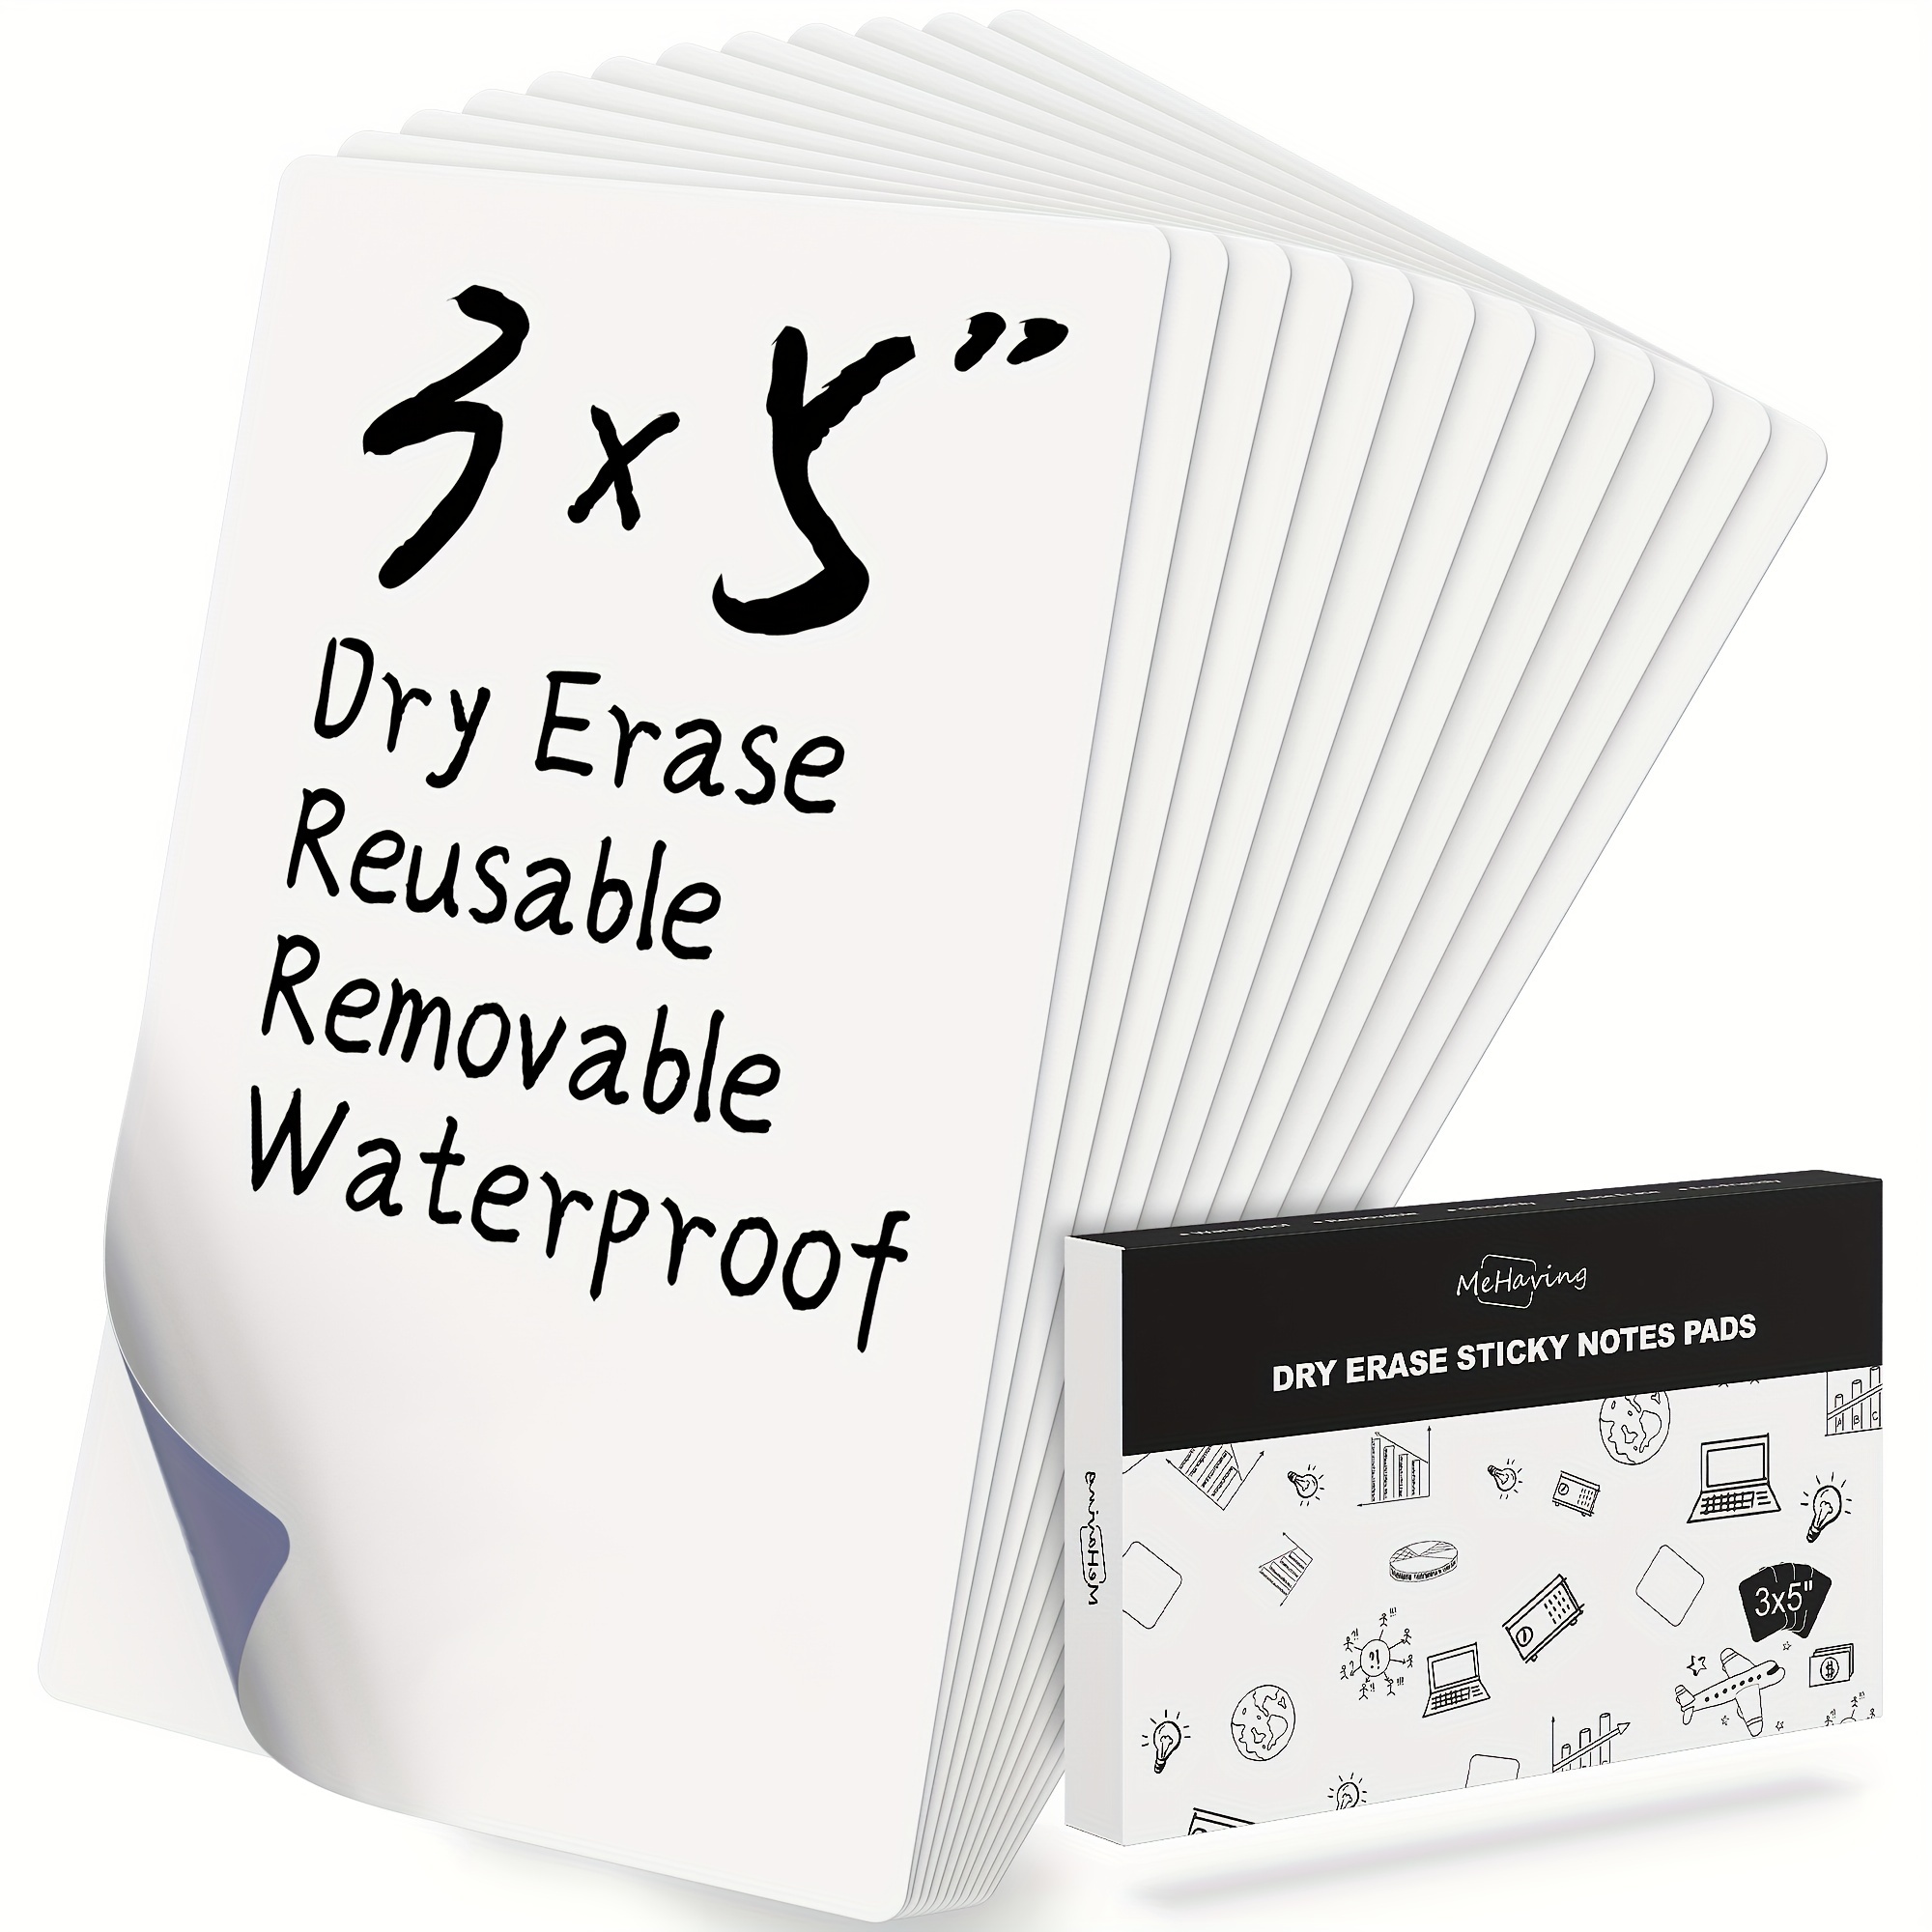 Dry Erase Sticky Notes. Reusable Whiteboard Stickers 3x3 12 Pack.  Suitable for All Smooth Surface. Great for Labels, Lists, Reminders and  Decals.